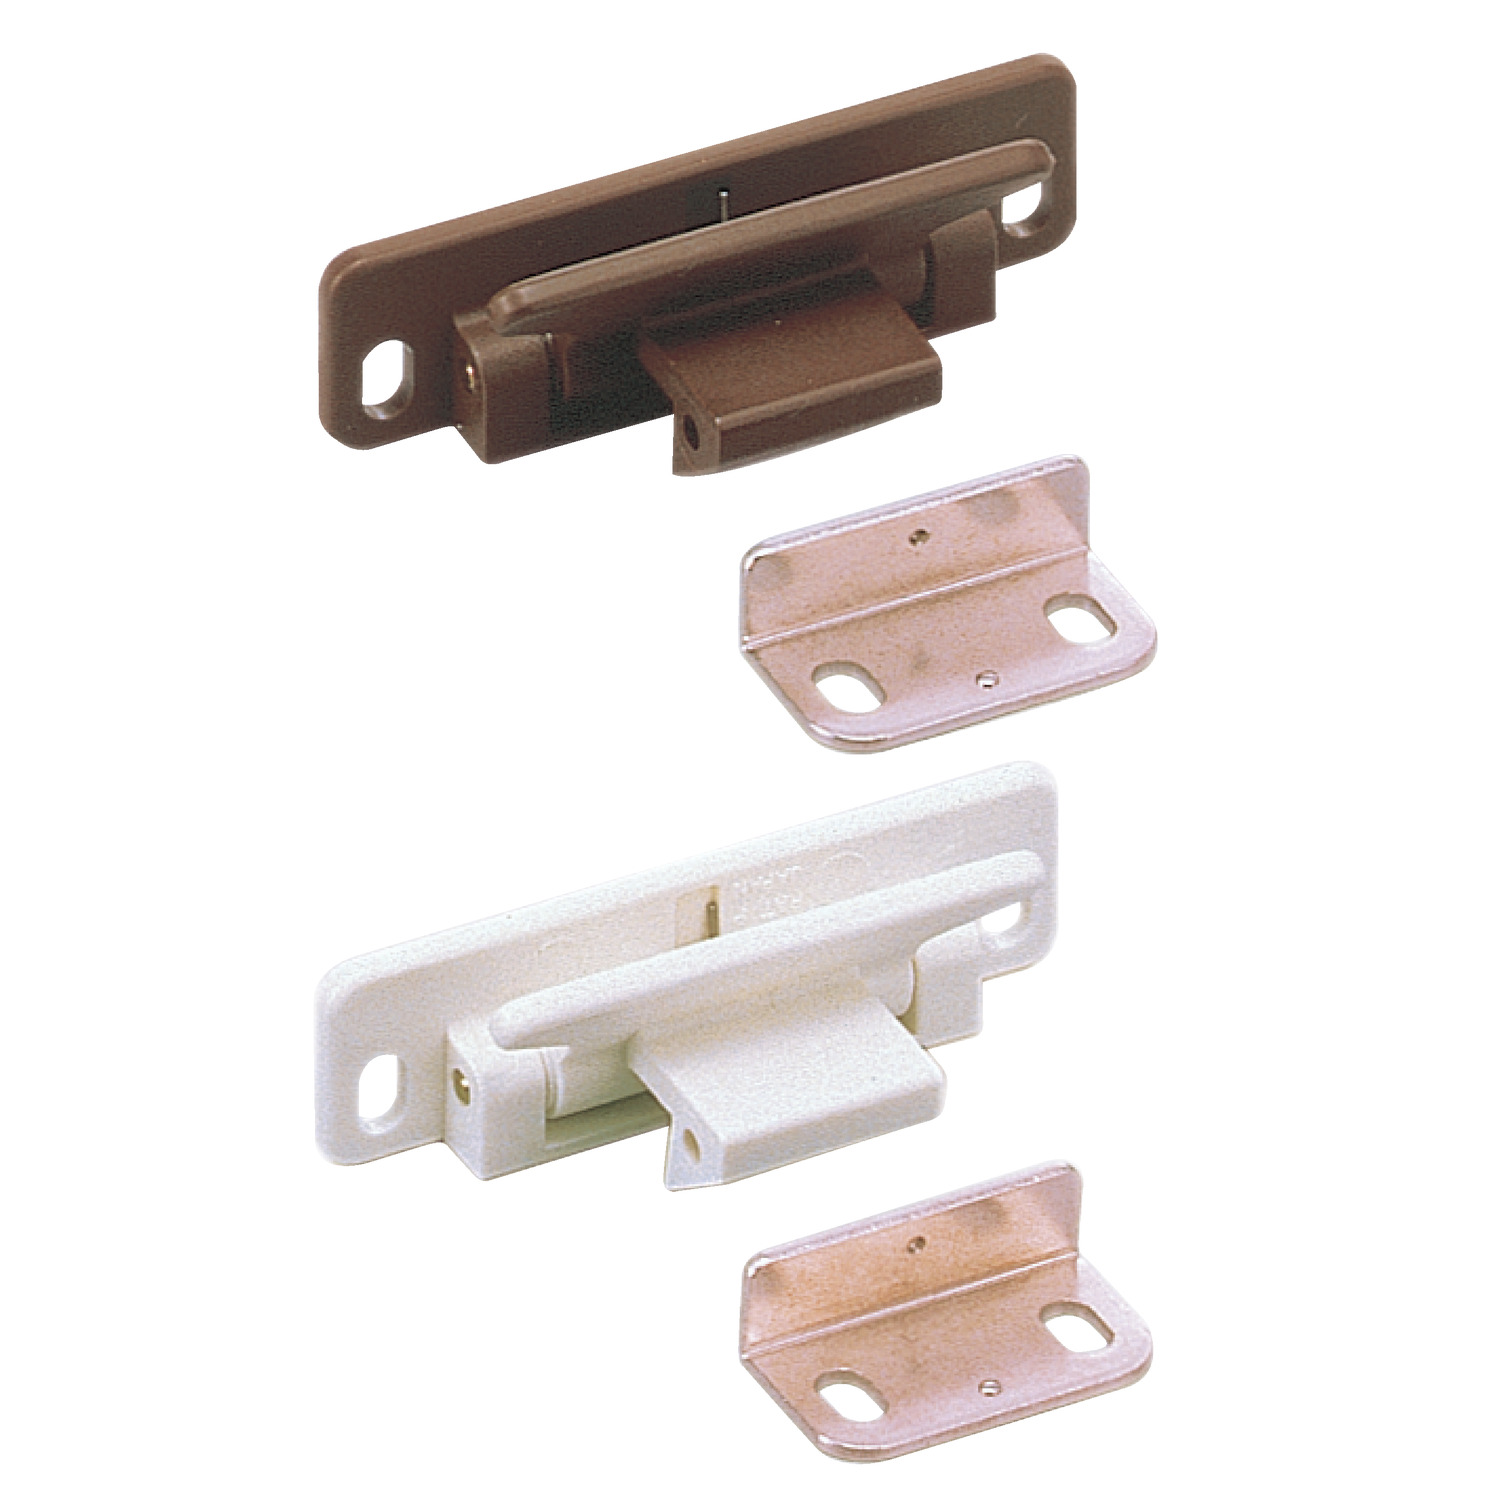 Lever Catches Lever catches are designed for use in applications where the door has no handle or knob to otherwise provide a latching mechanism for the door or panel.